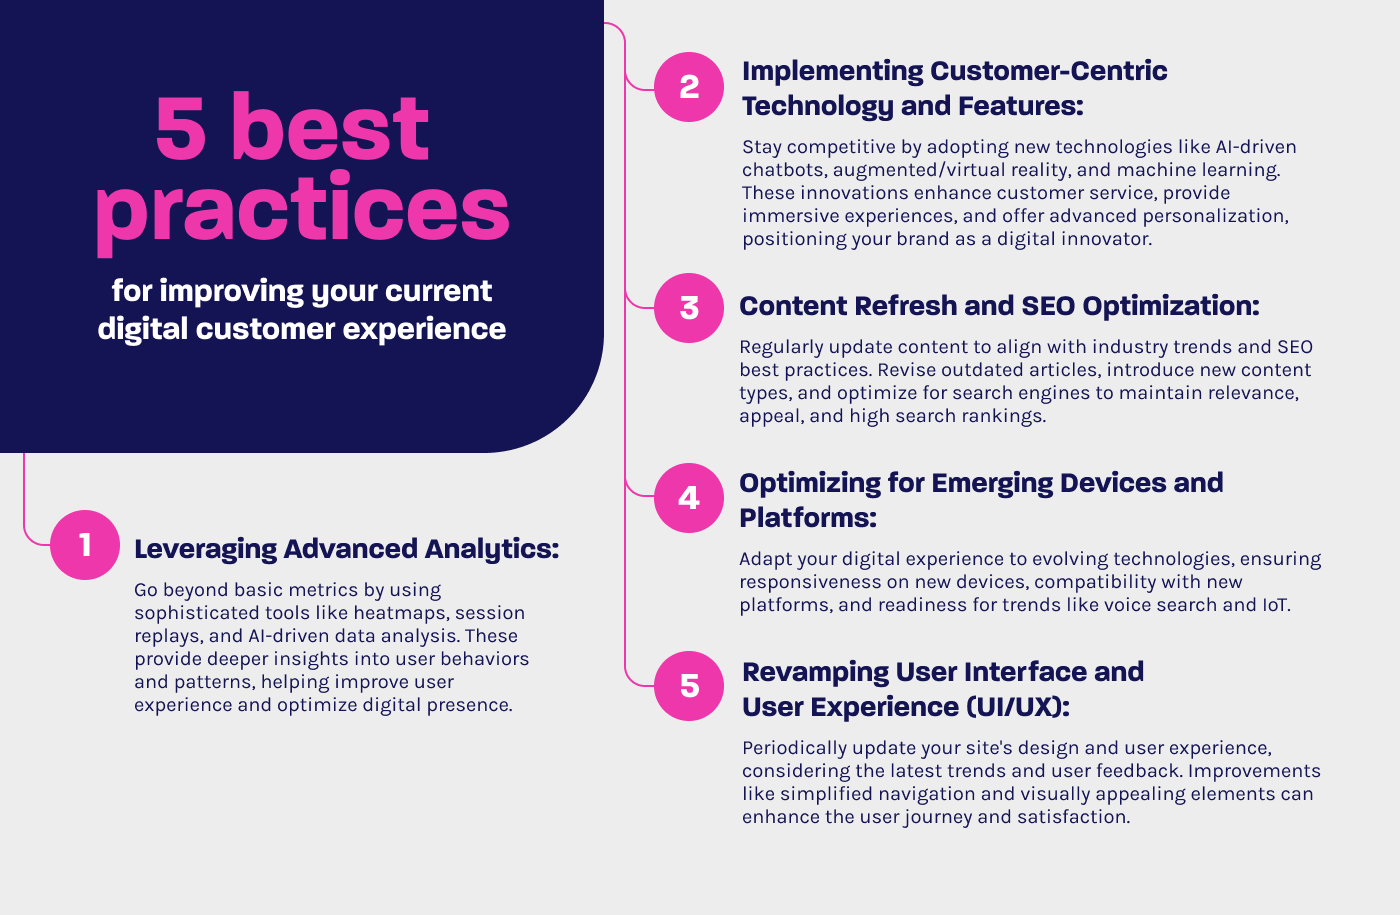 An infographic showing 5 best practices for improving your current digital customer experience